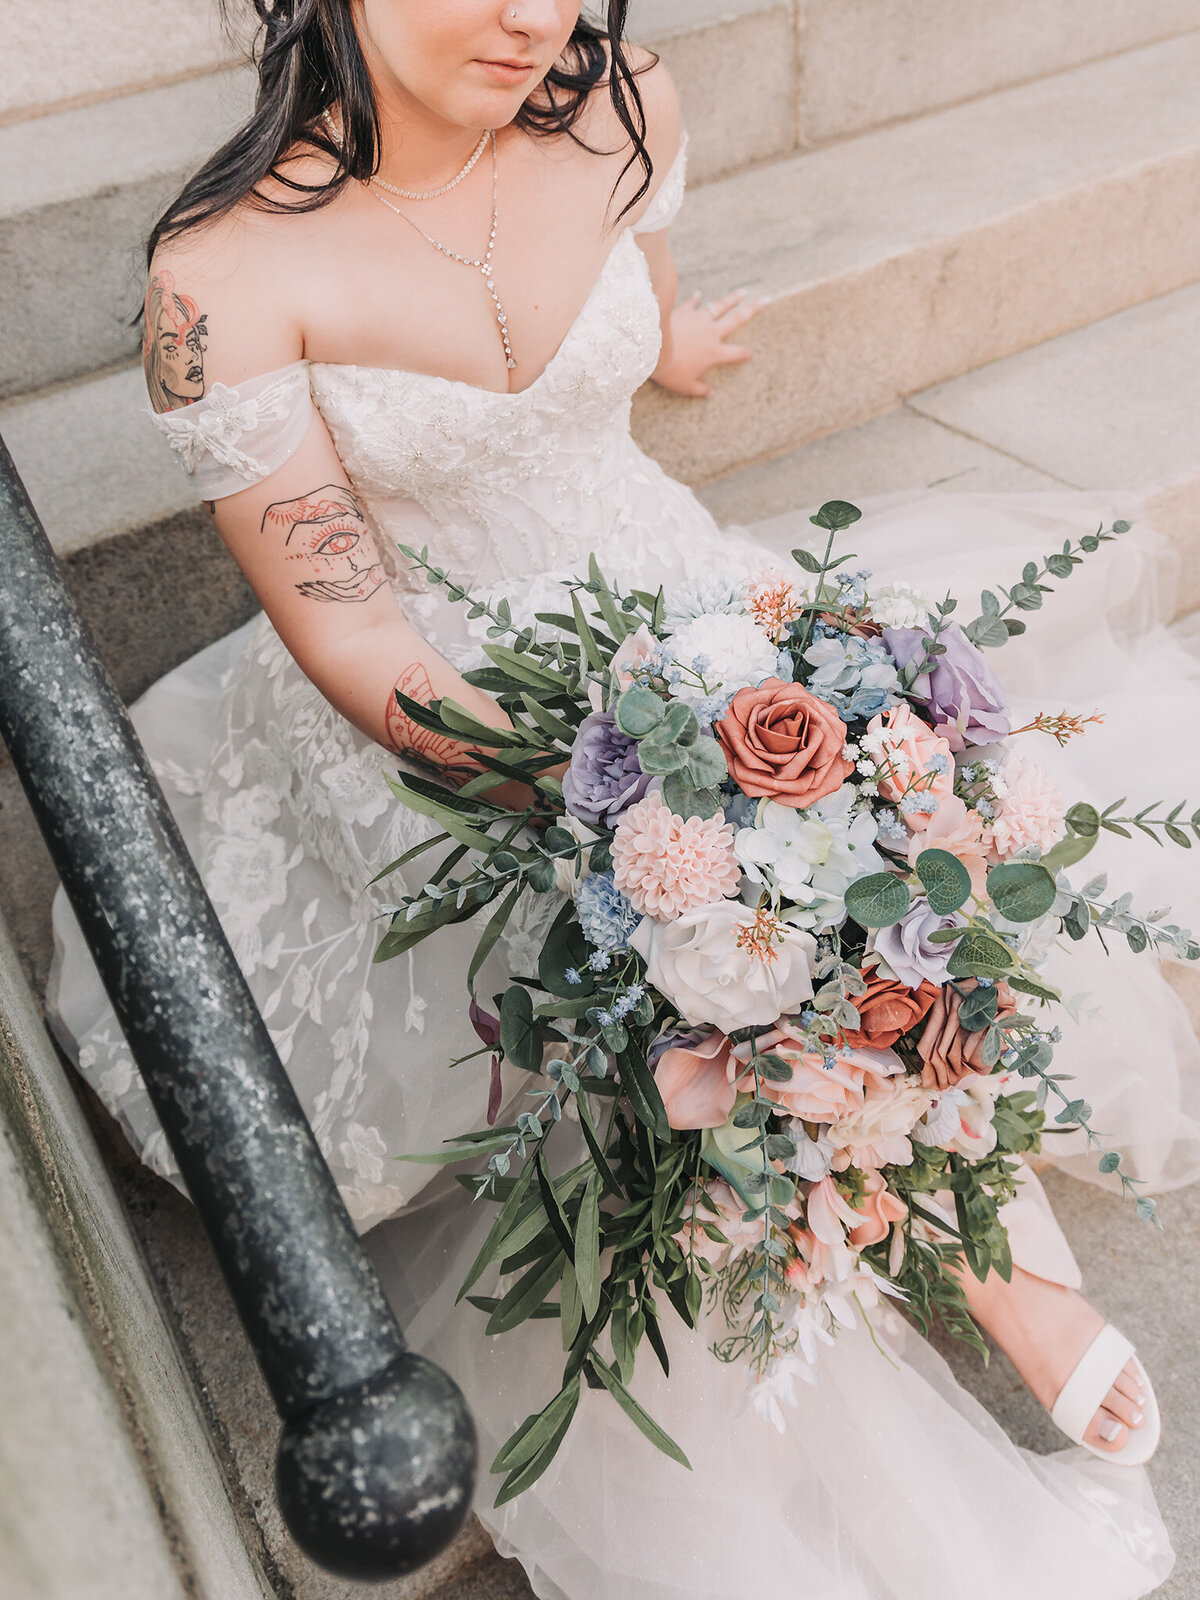 candid photo of a bride wearing an off-the-shoulder white and champagne floral lace wedding gown sitting on marble stairs holding a cascading red, pink, peach, white, blue and purple wedding bouquet taken by Massachusetts Wedding Photographer Avid Aperture Photography located at Customs House Square in New Bedford Massachusetts